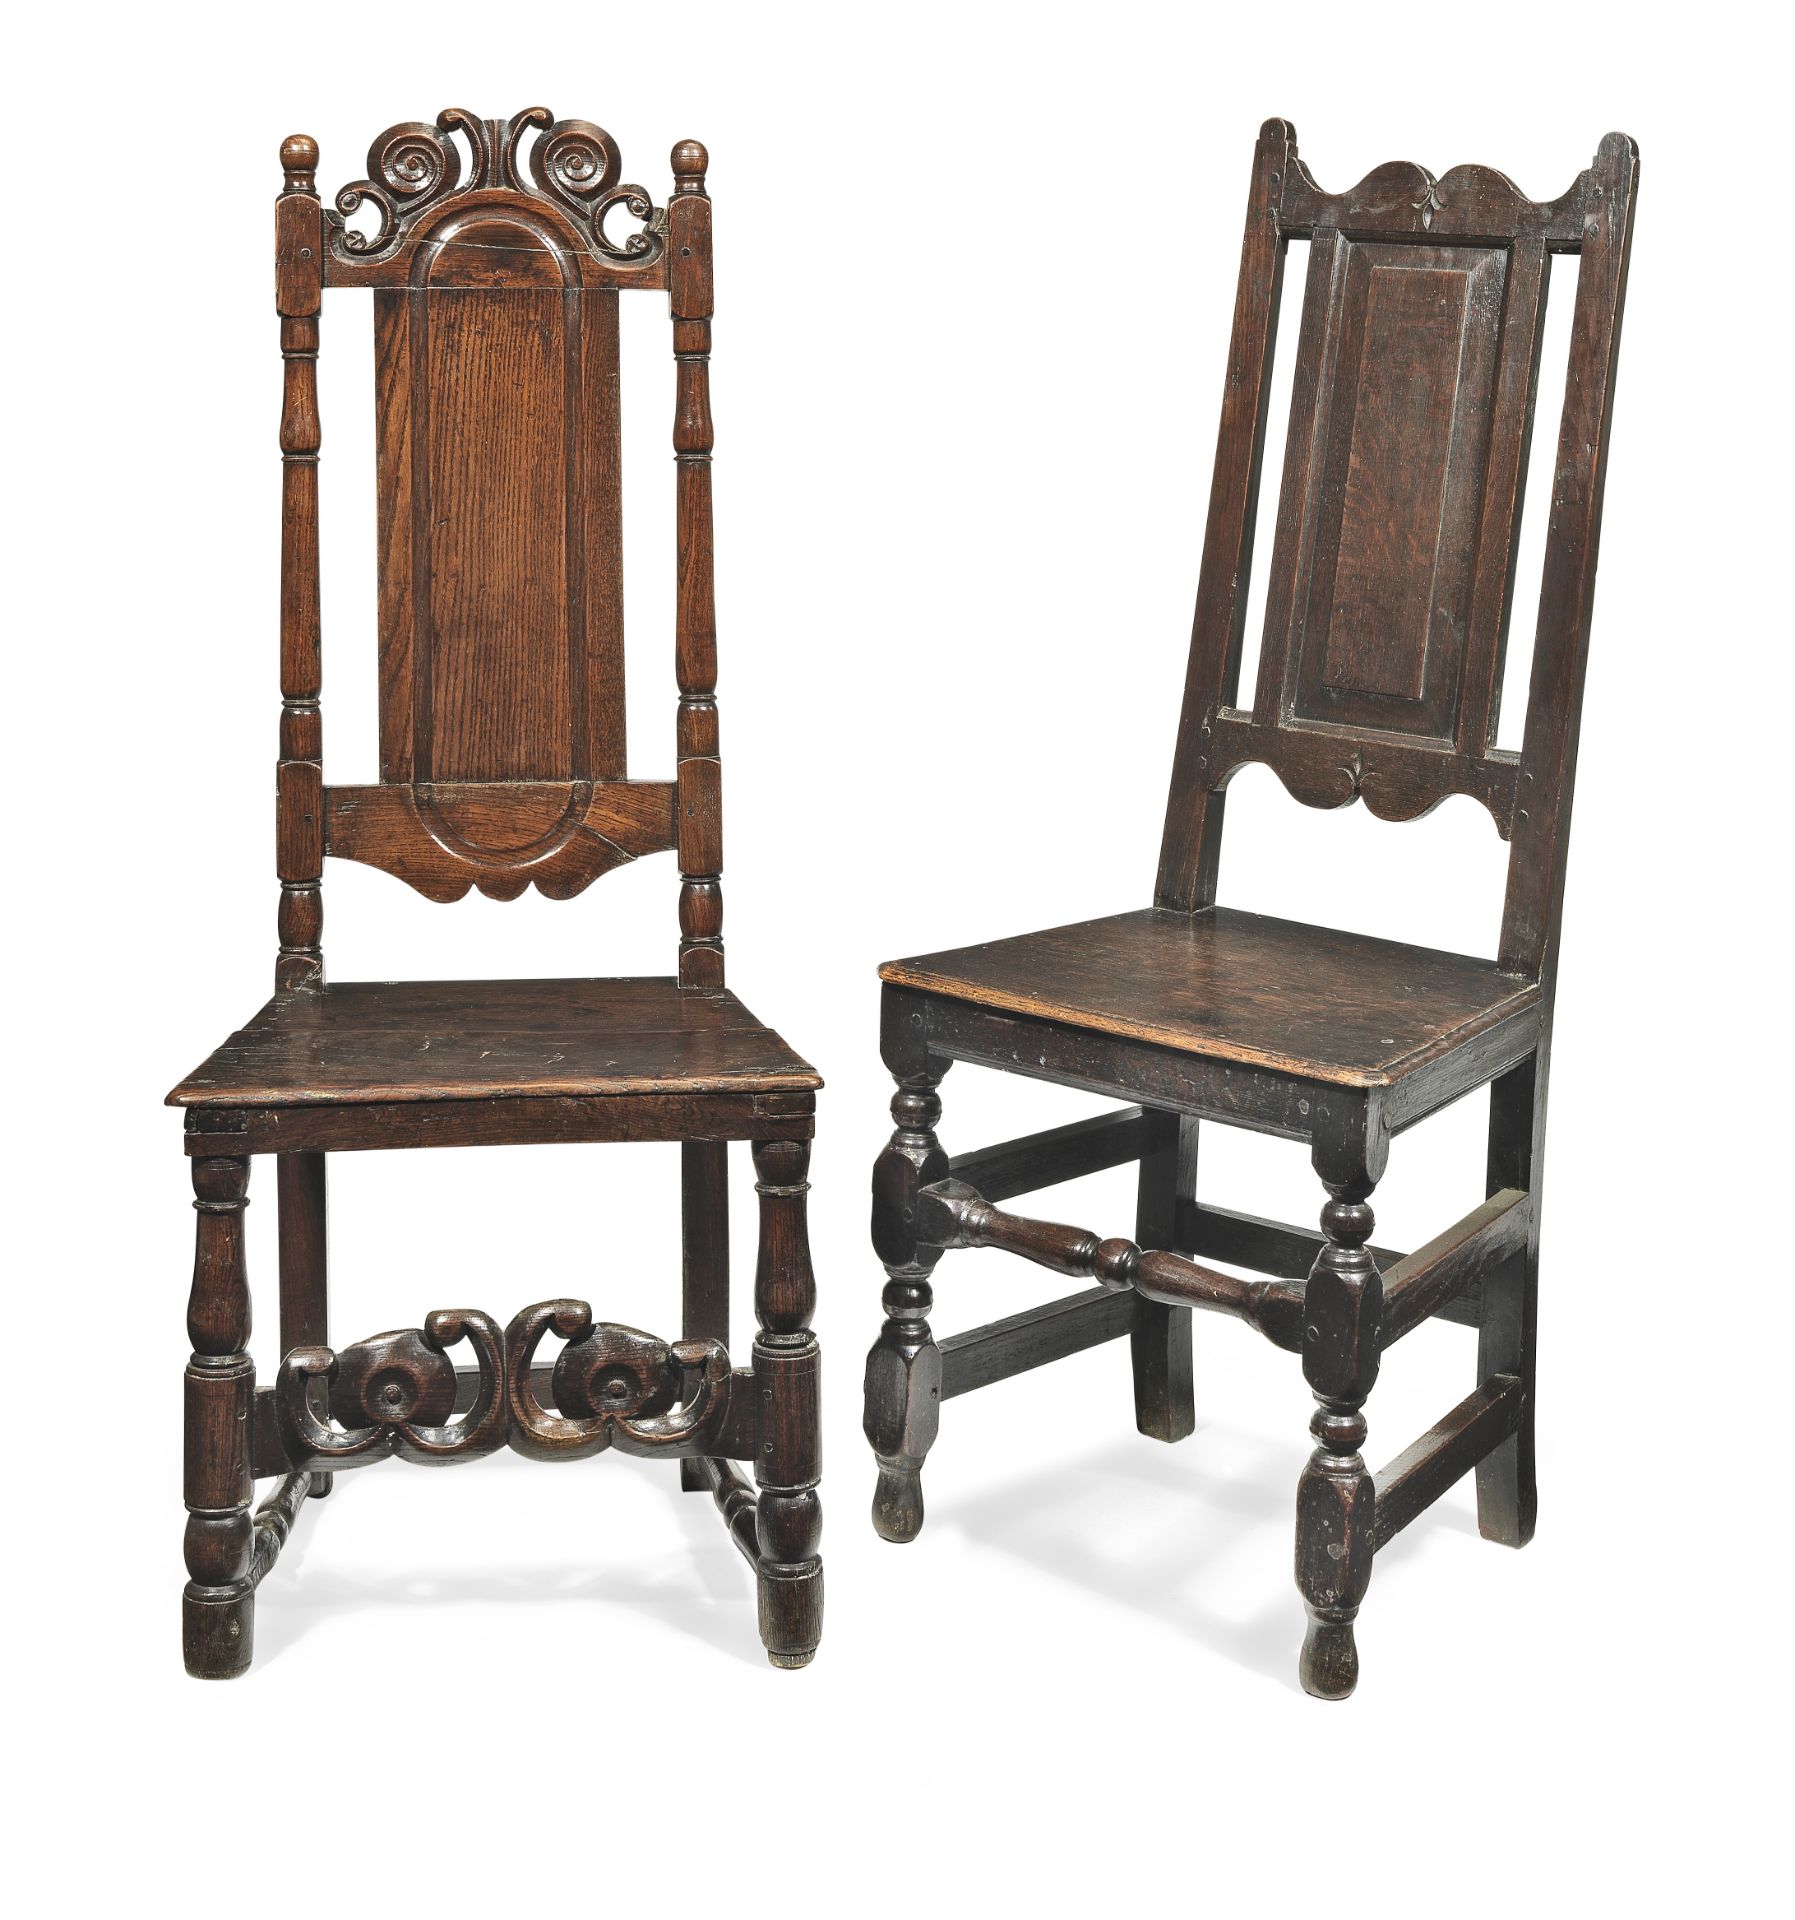 Two joined oak high-back side chairs, English, circa 1700-20 (2)